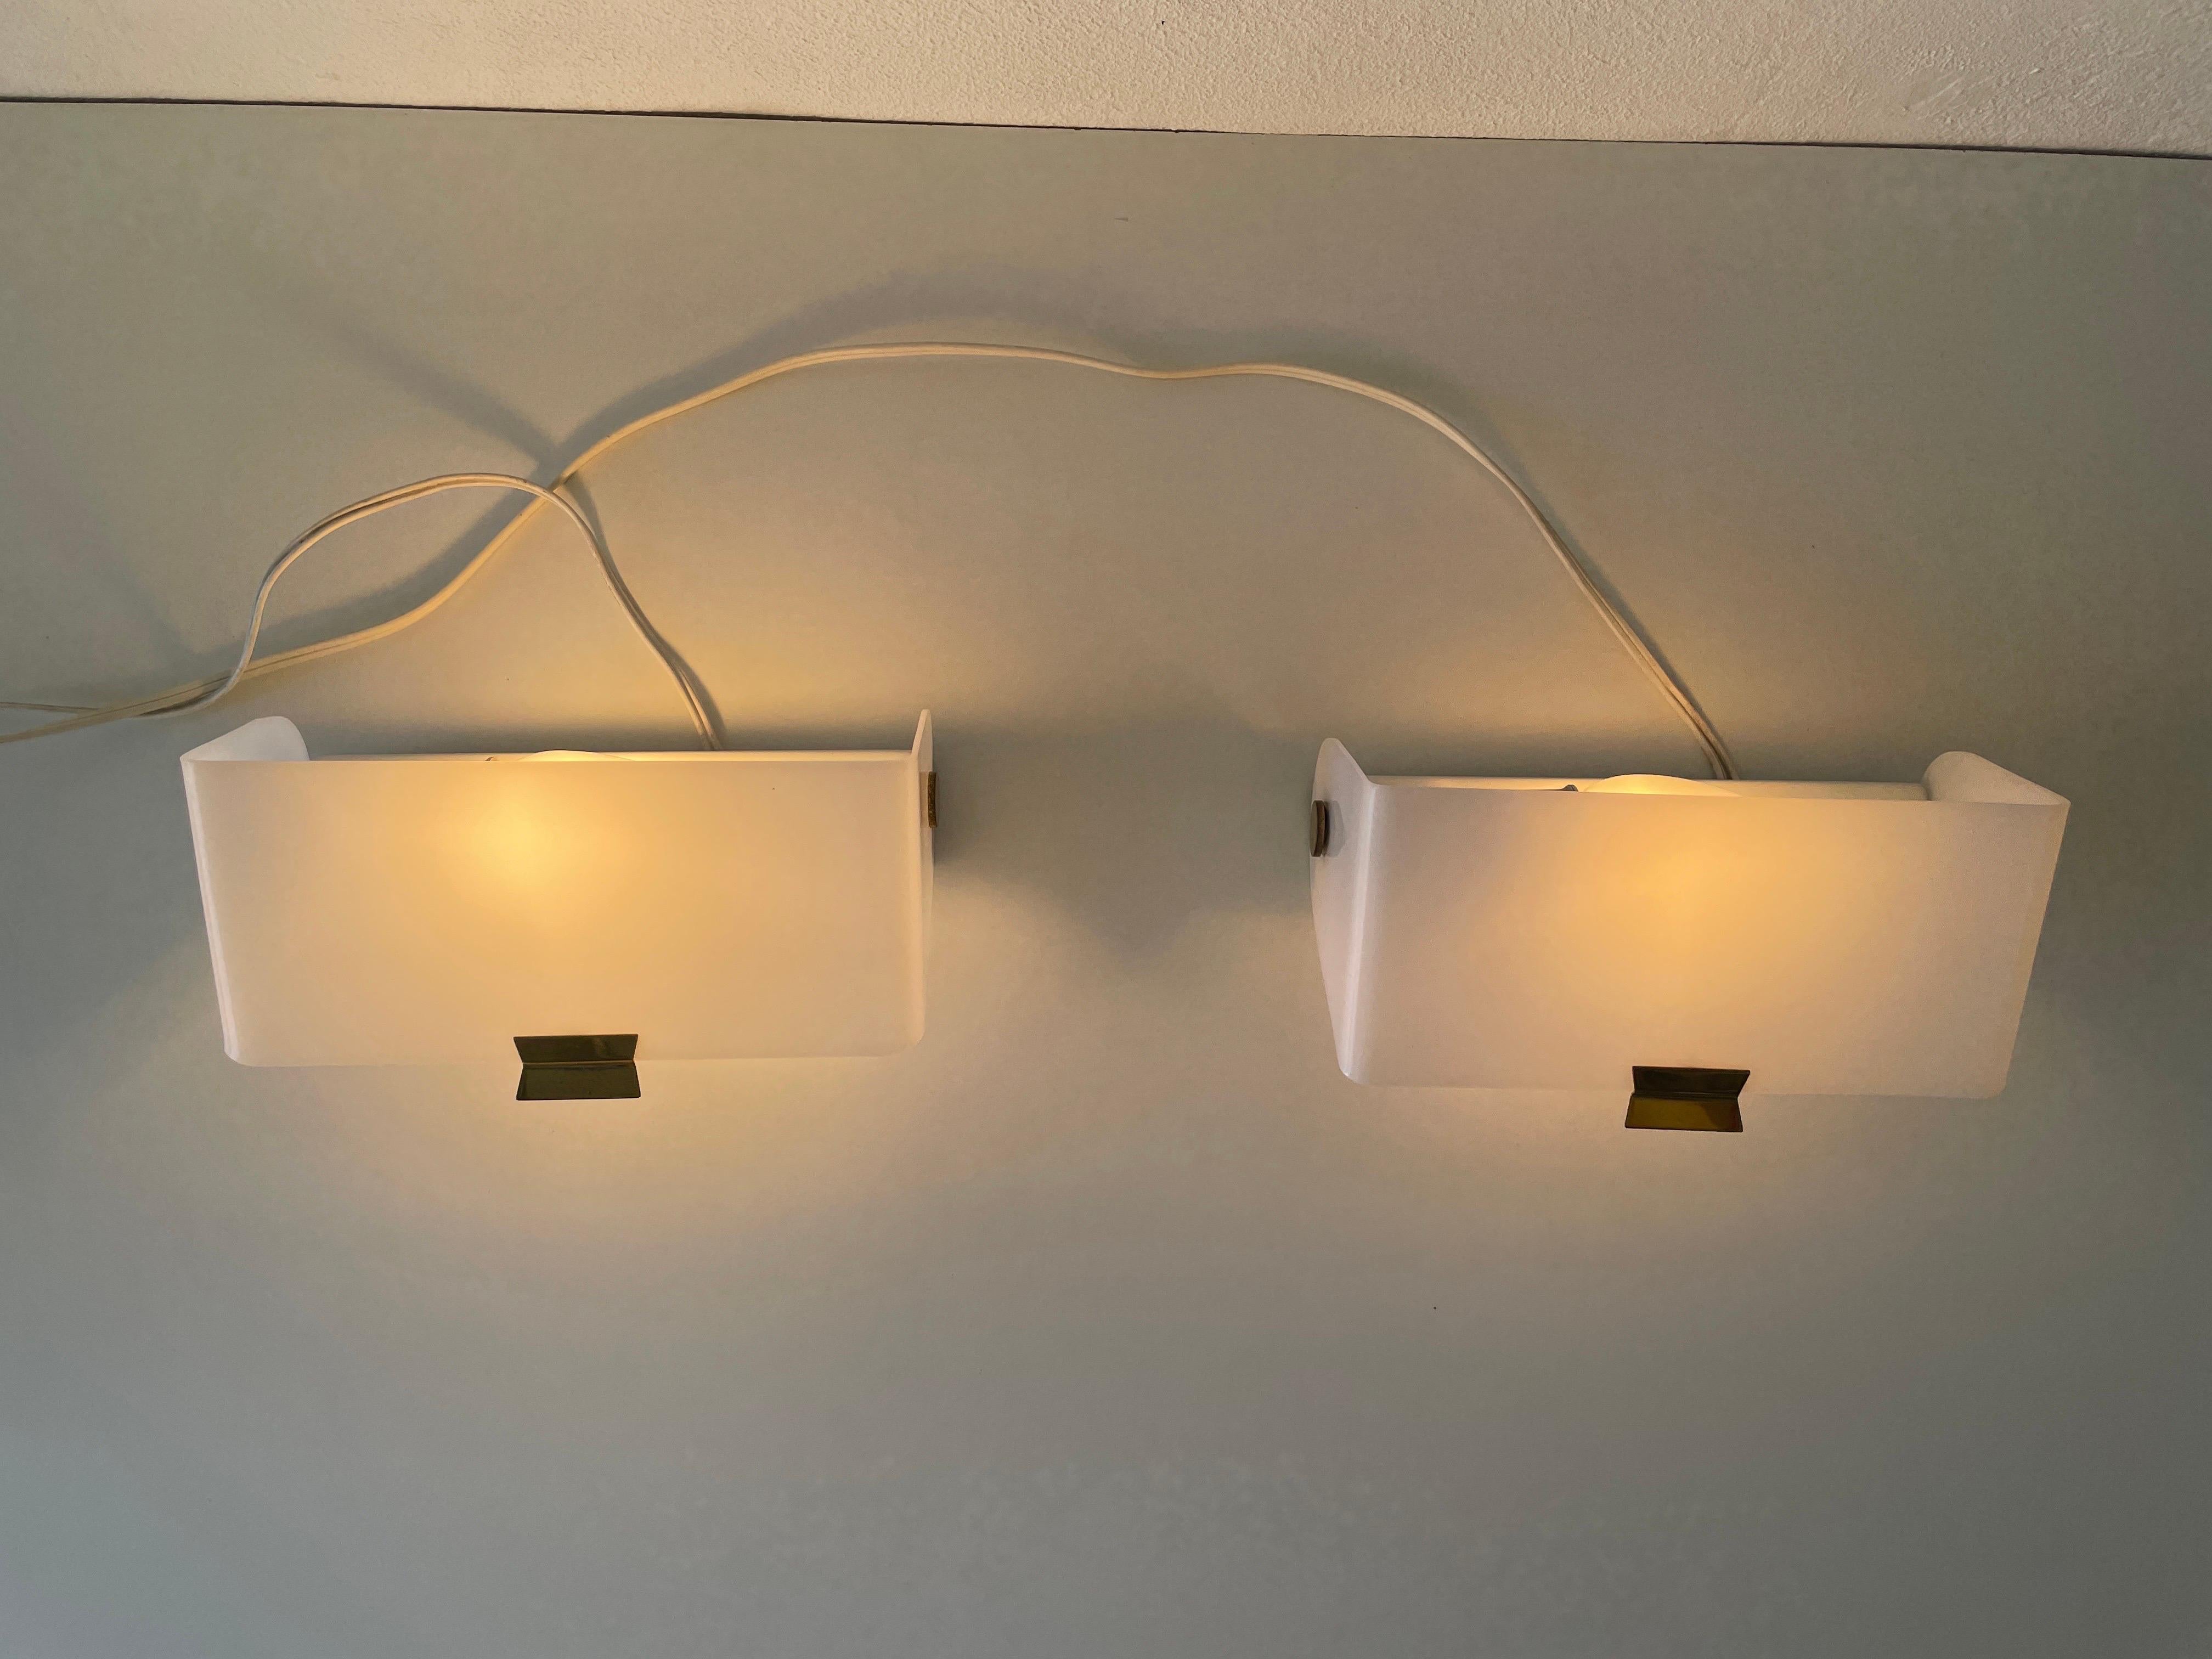 White Plexiglass Adjustable Shade Pair of Sconces, 1950s, Germany For Sale 5